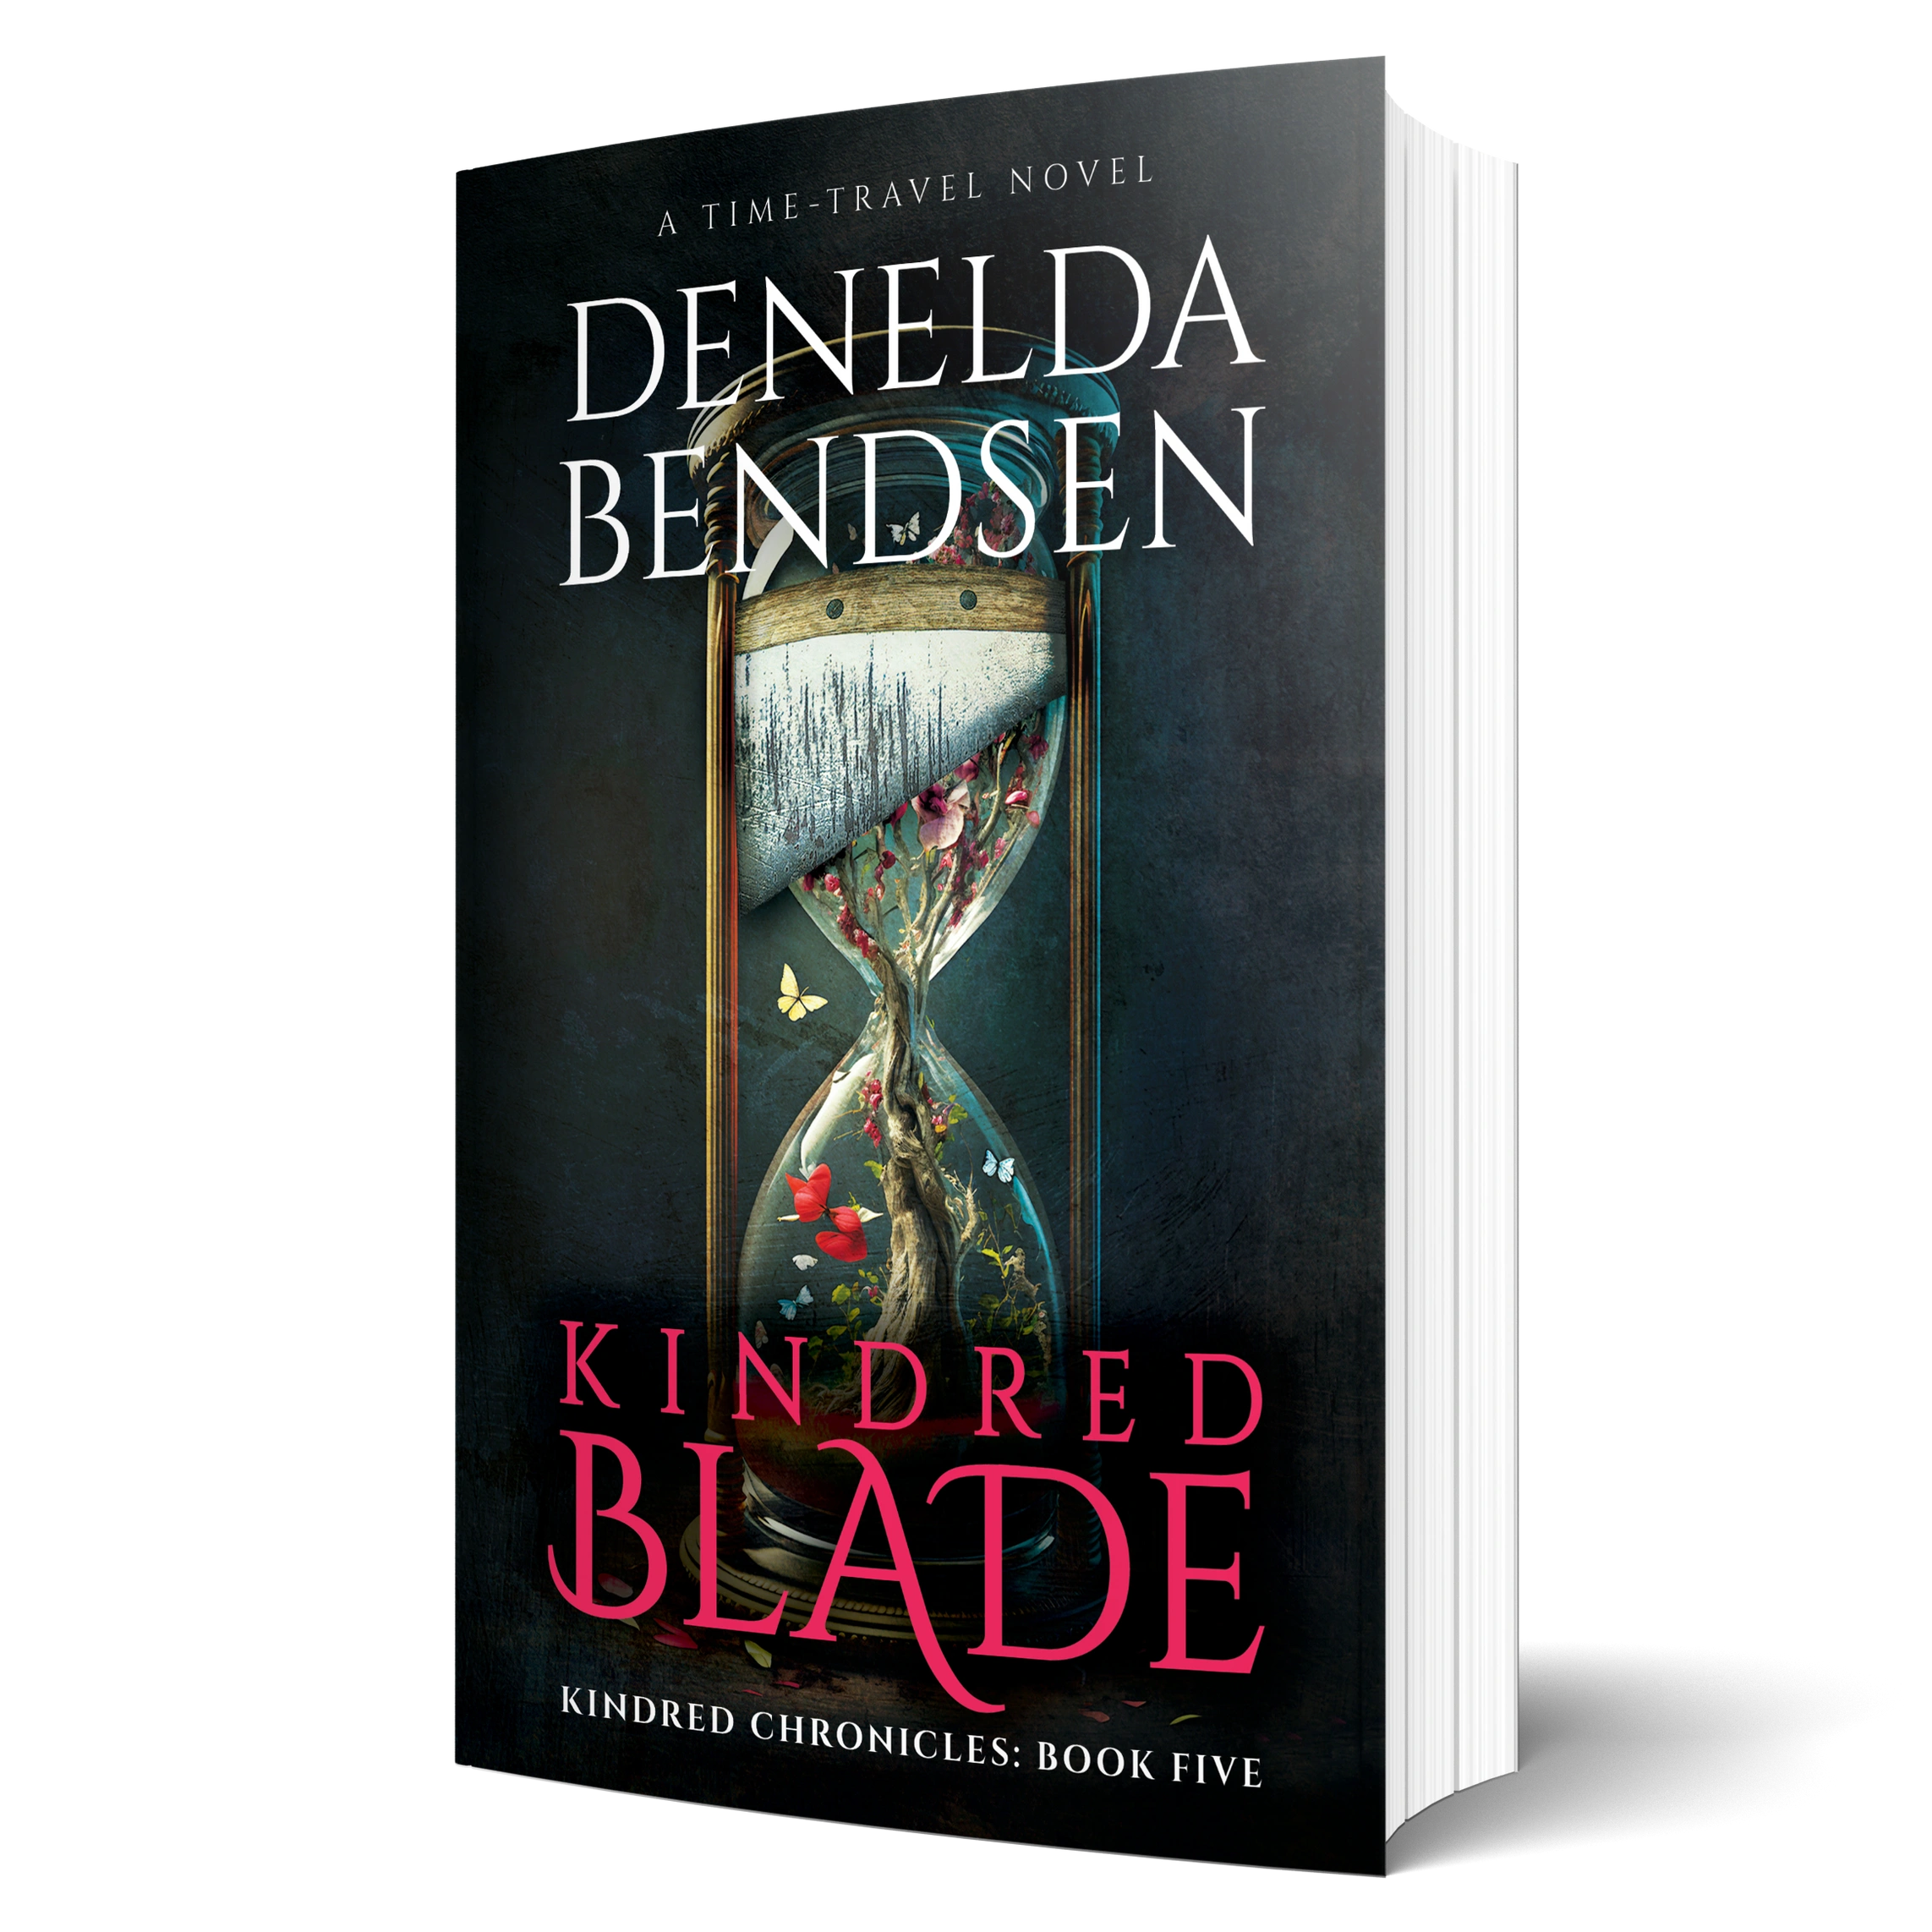 Cover of KINDRED BLADE, a time-travel rescue from the French Revolution.